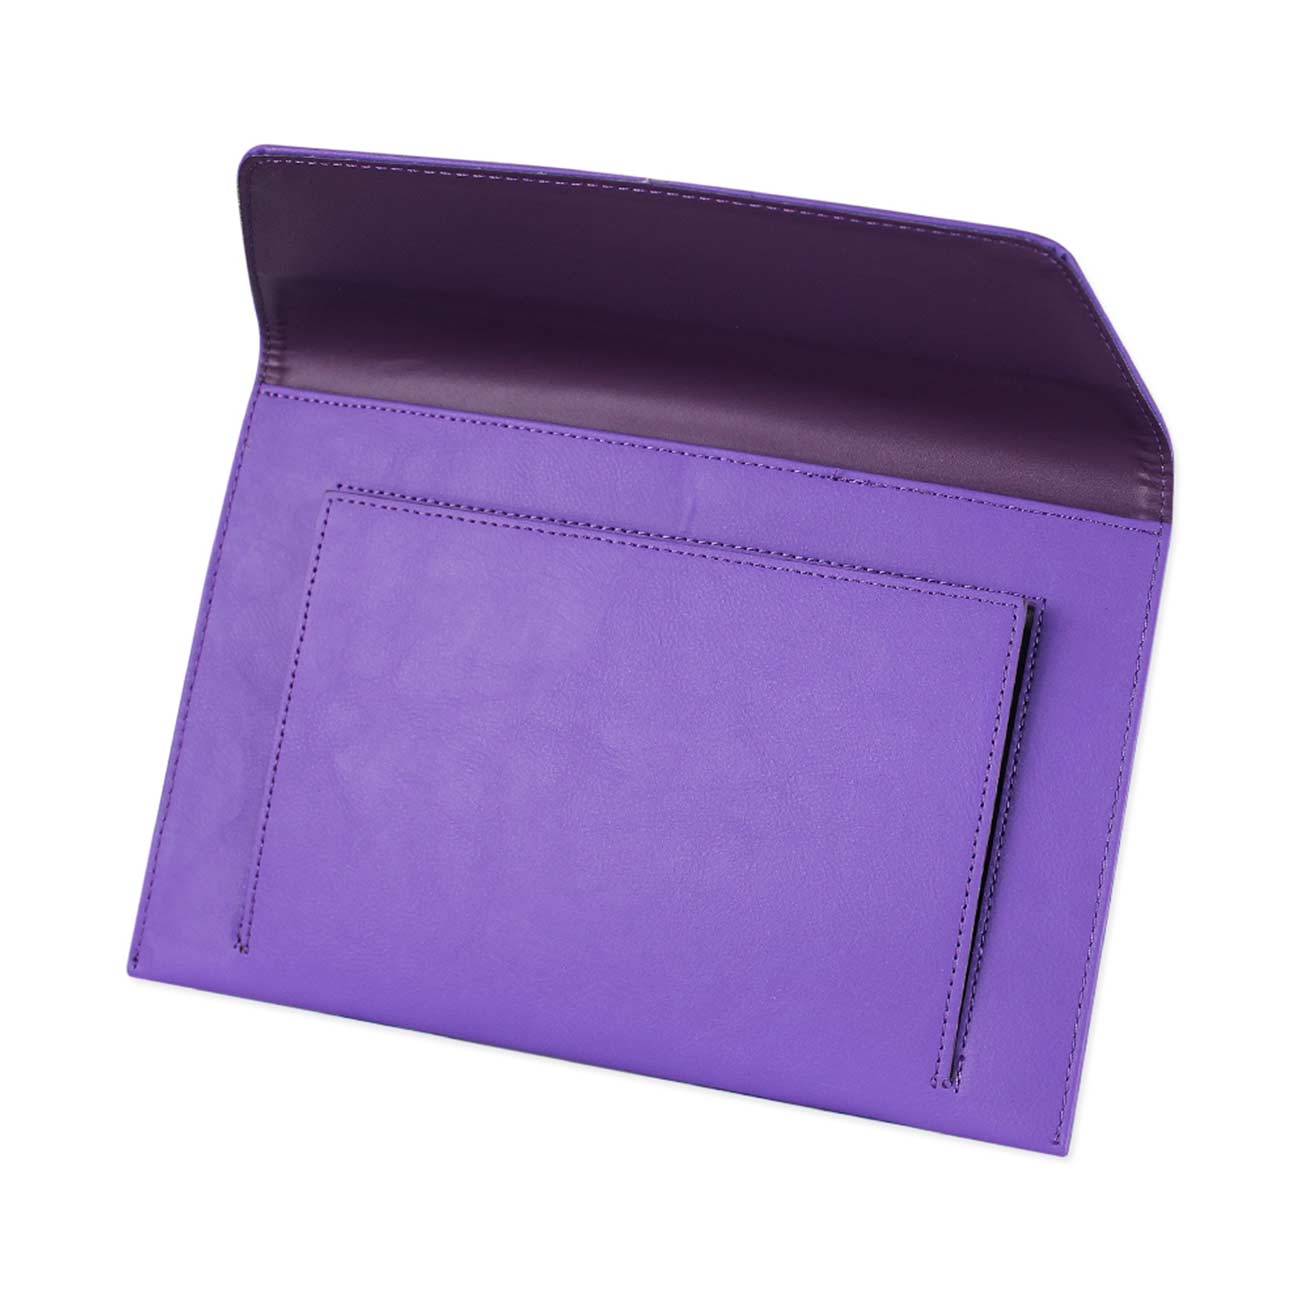 REIKO PREMIUM LEATHER CASE POUCH FOR 8.9INCHES IPADS AND TABLETS In PURPLE